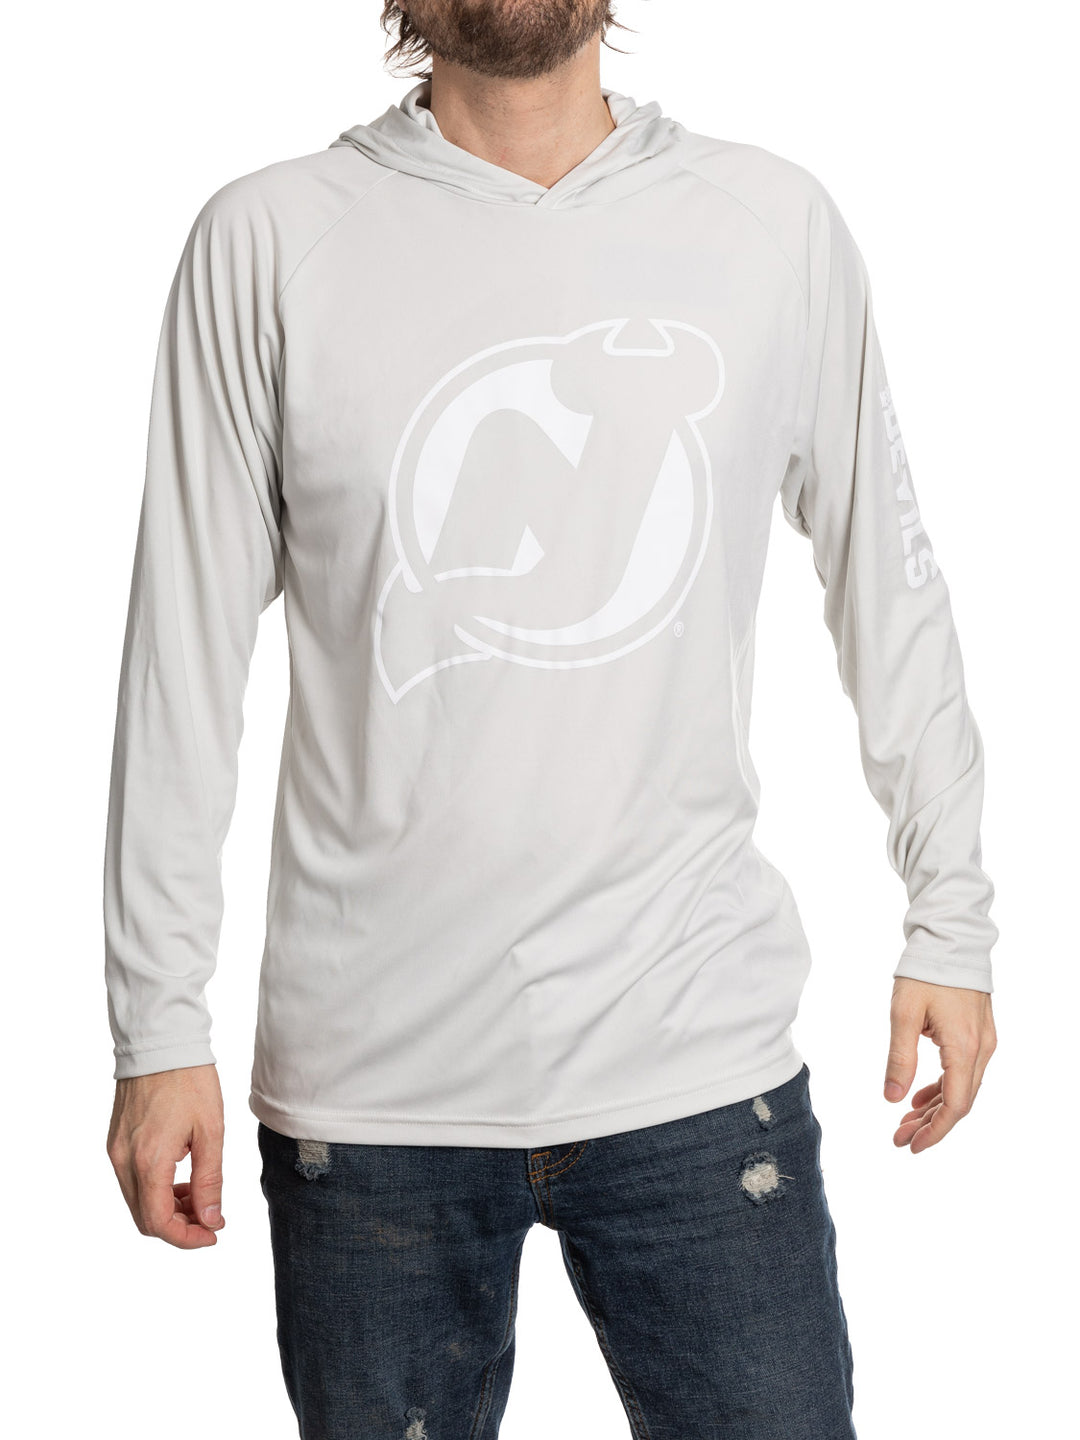 New Jersey Devils Hooded Rashguard with UV Protection